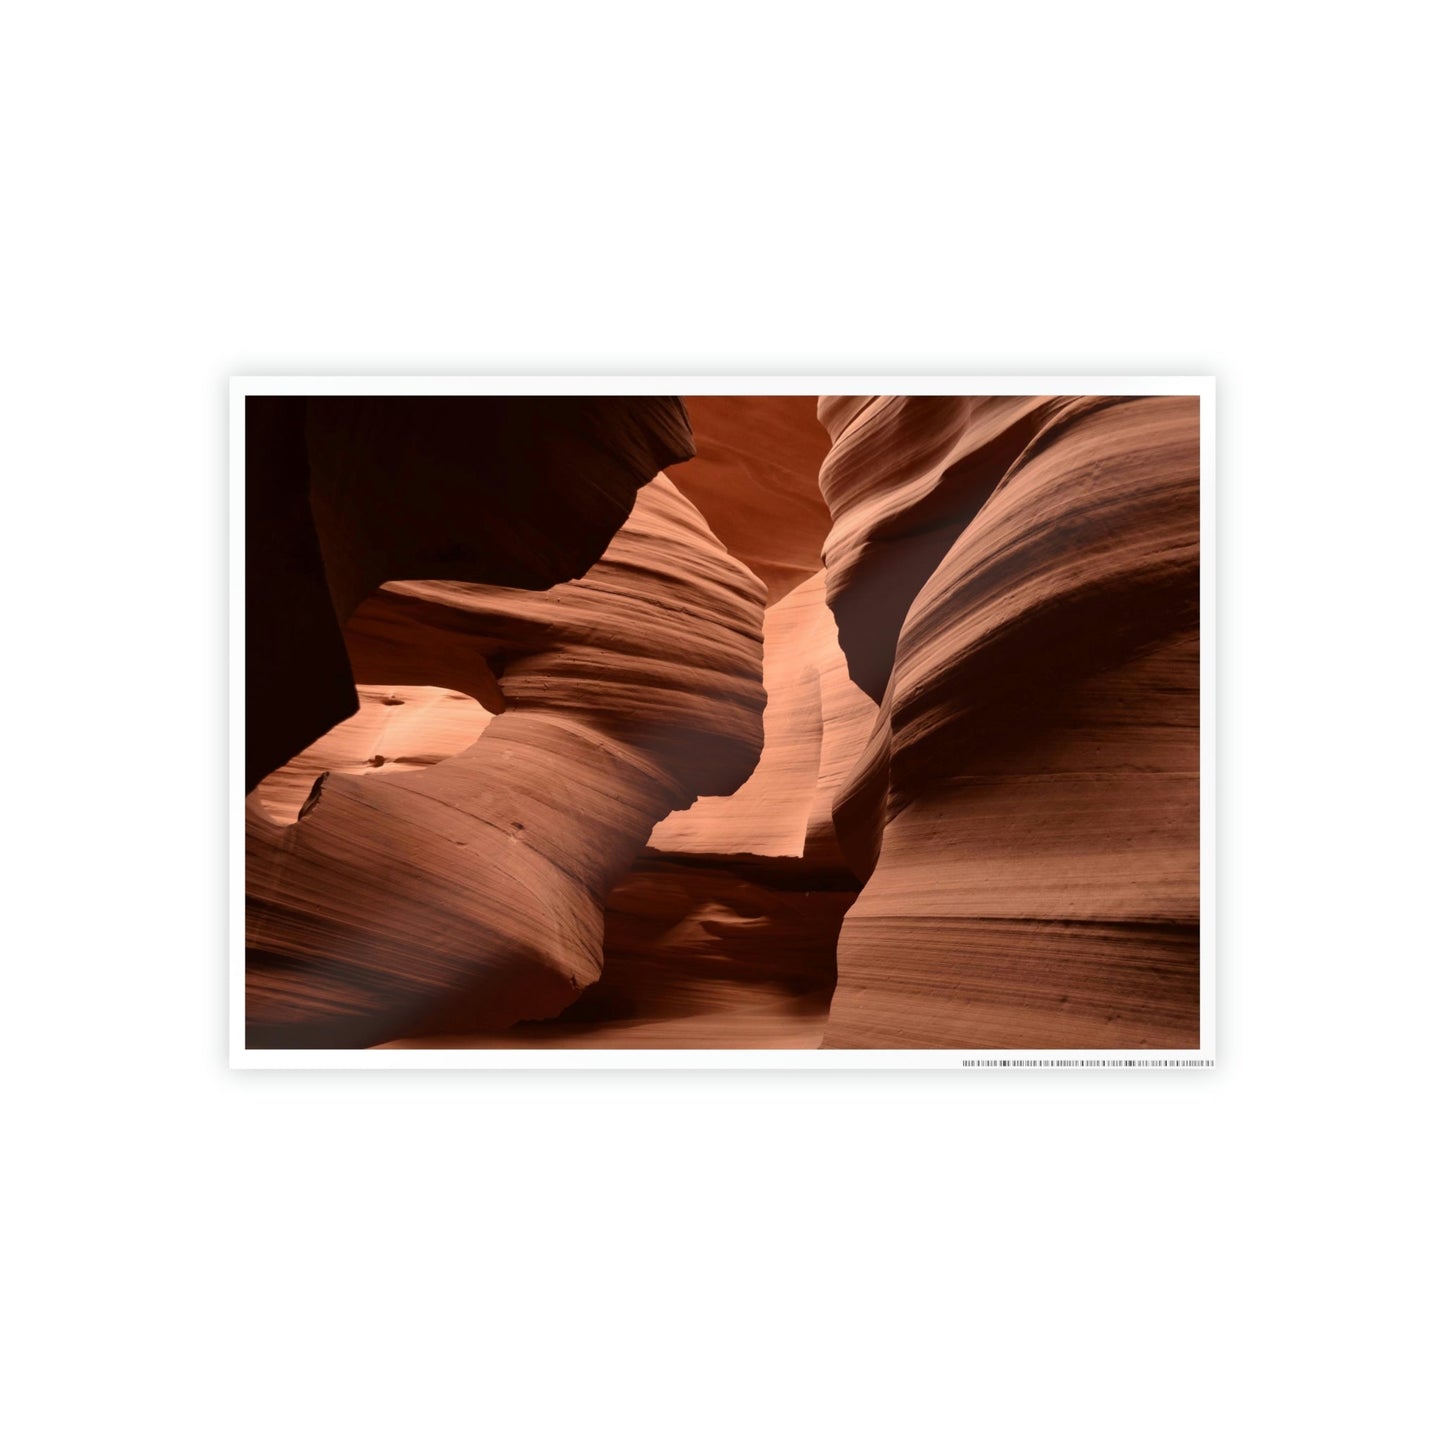 Majestic Canyons: Natural Canvas and Art Prints of Canyon Landscapes